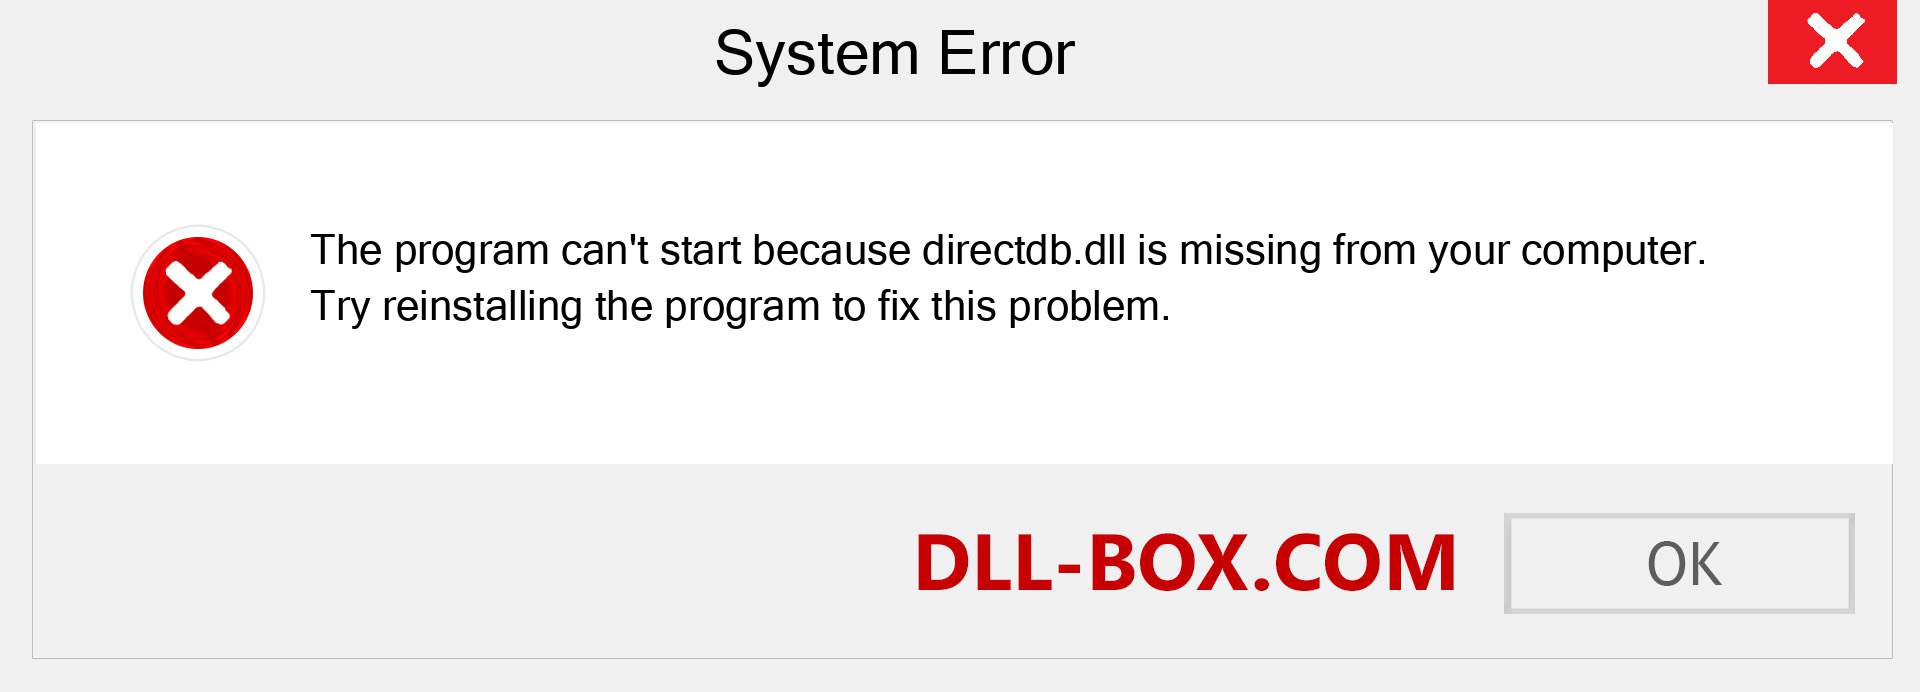  directdb.dll file is missing?. Download for Windows 7, 8, 10 - Fix  directdb dll Missing Error on Windows, photos, images